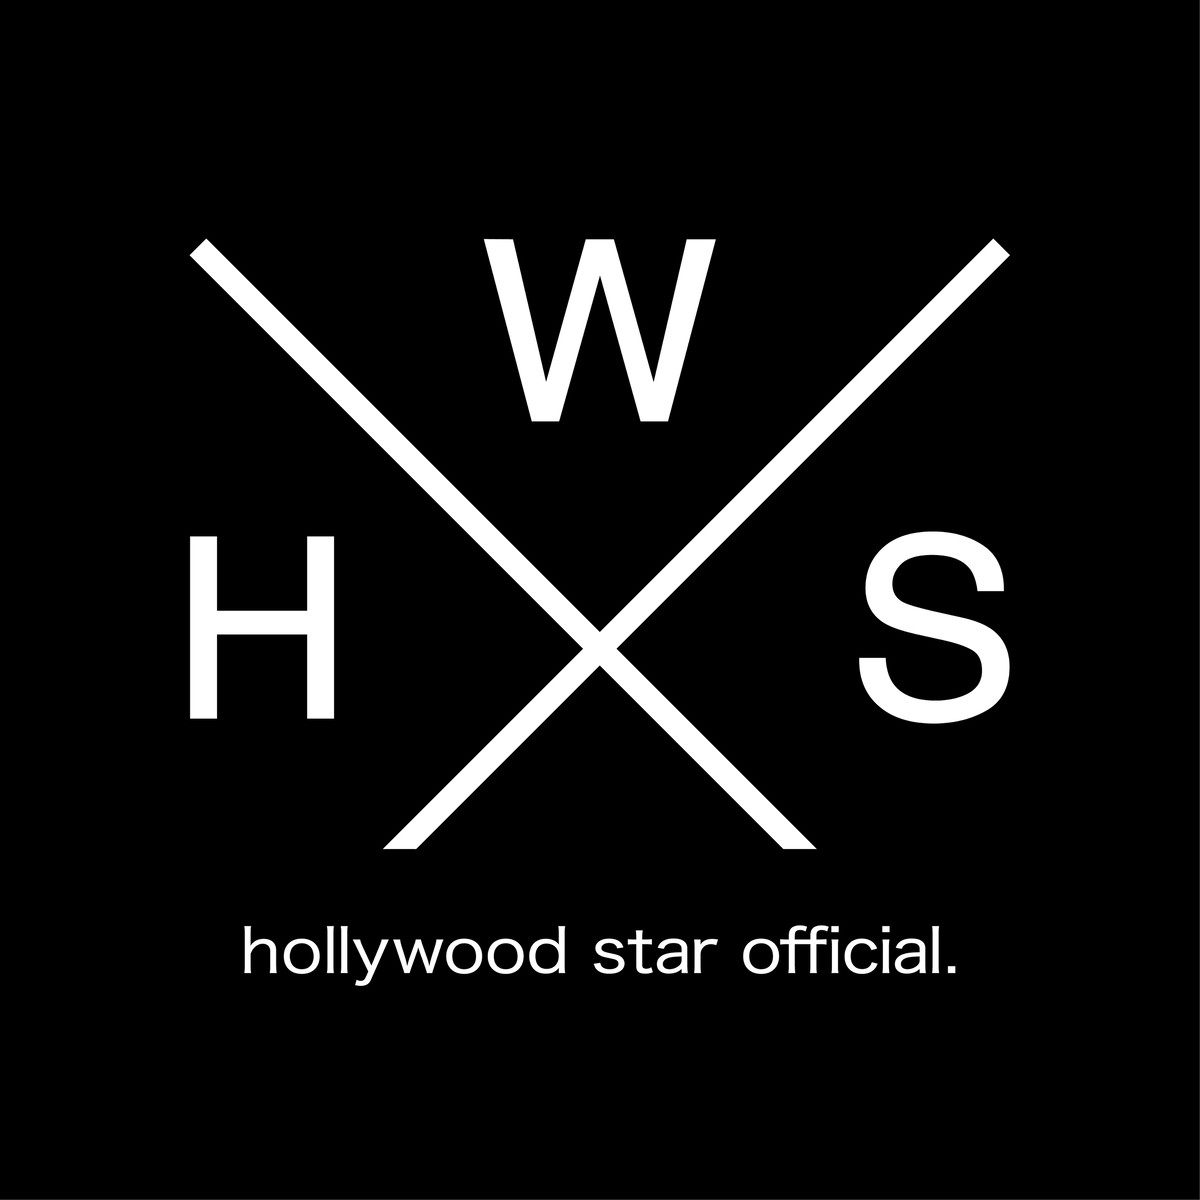 Hollywood Star Official